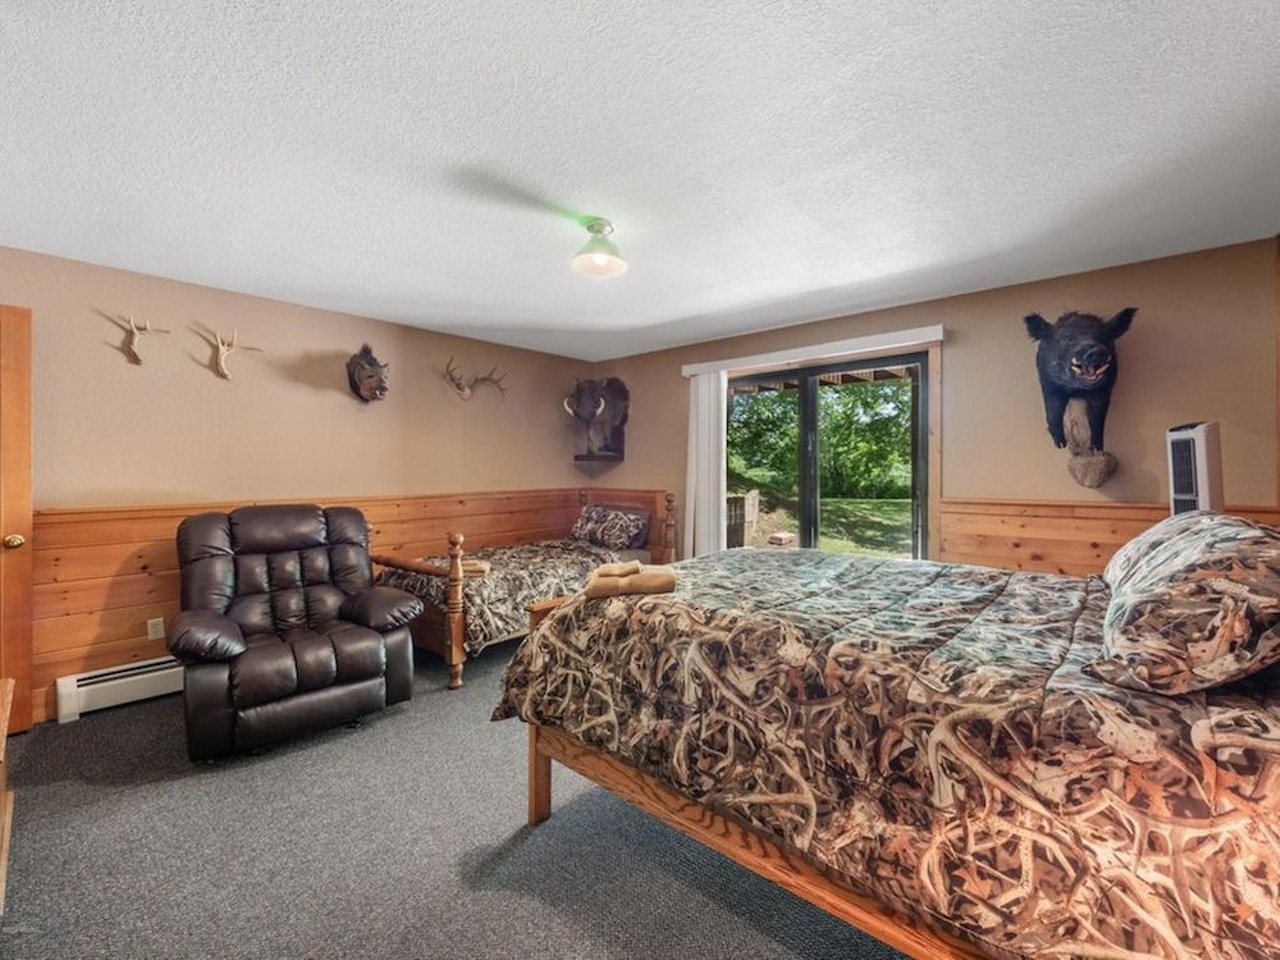 This creepy $2.65 million hunting lodge filled with taxidermy in western Michigan could be new MAGA HQ